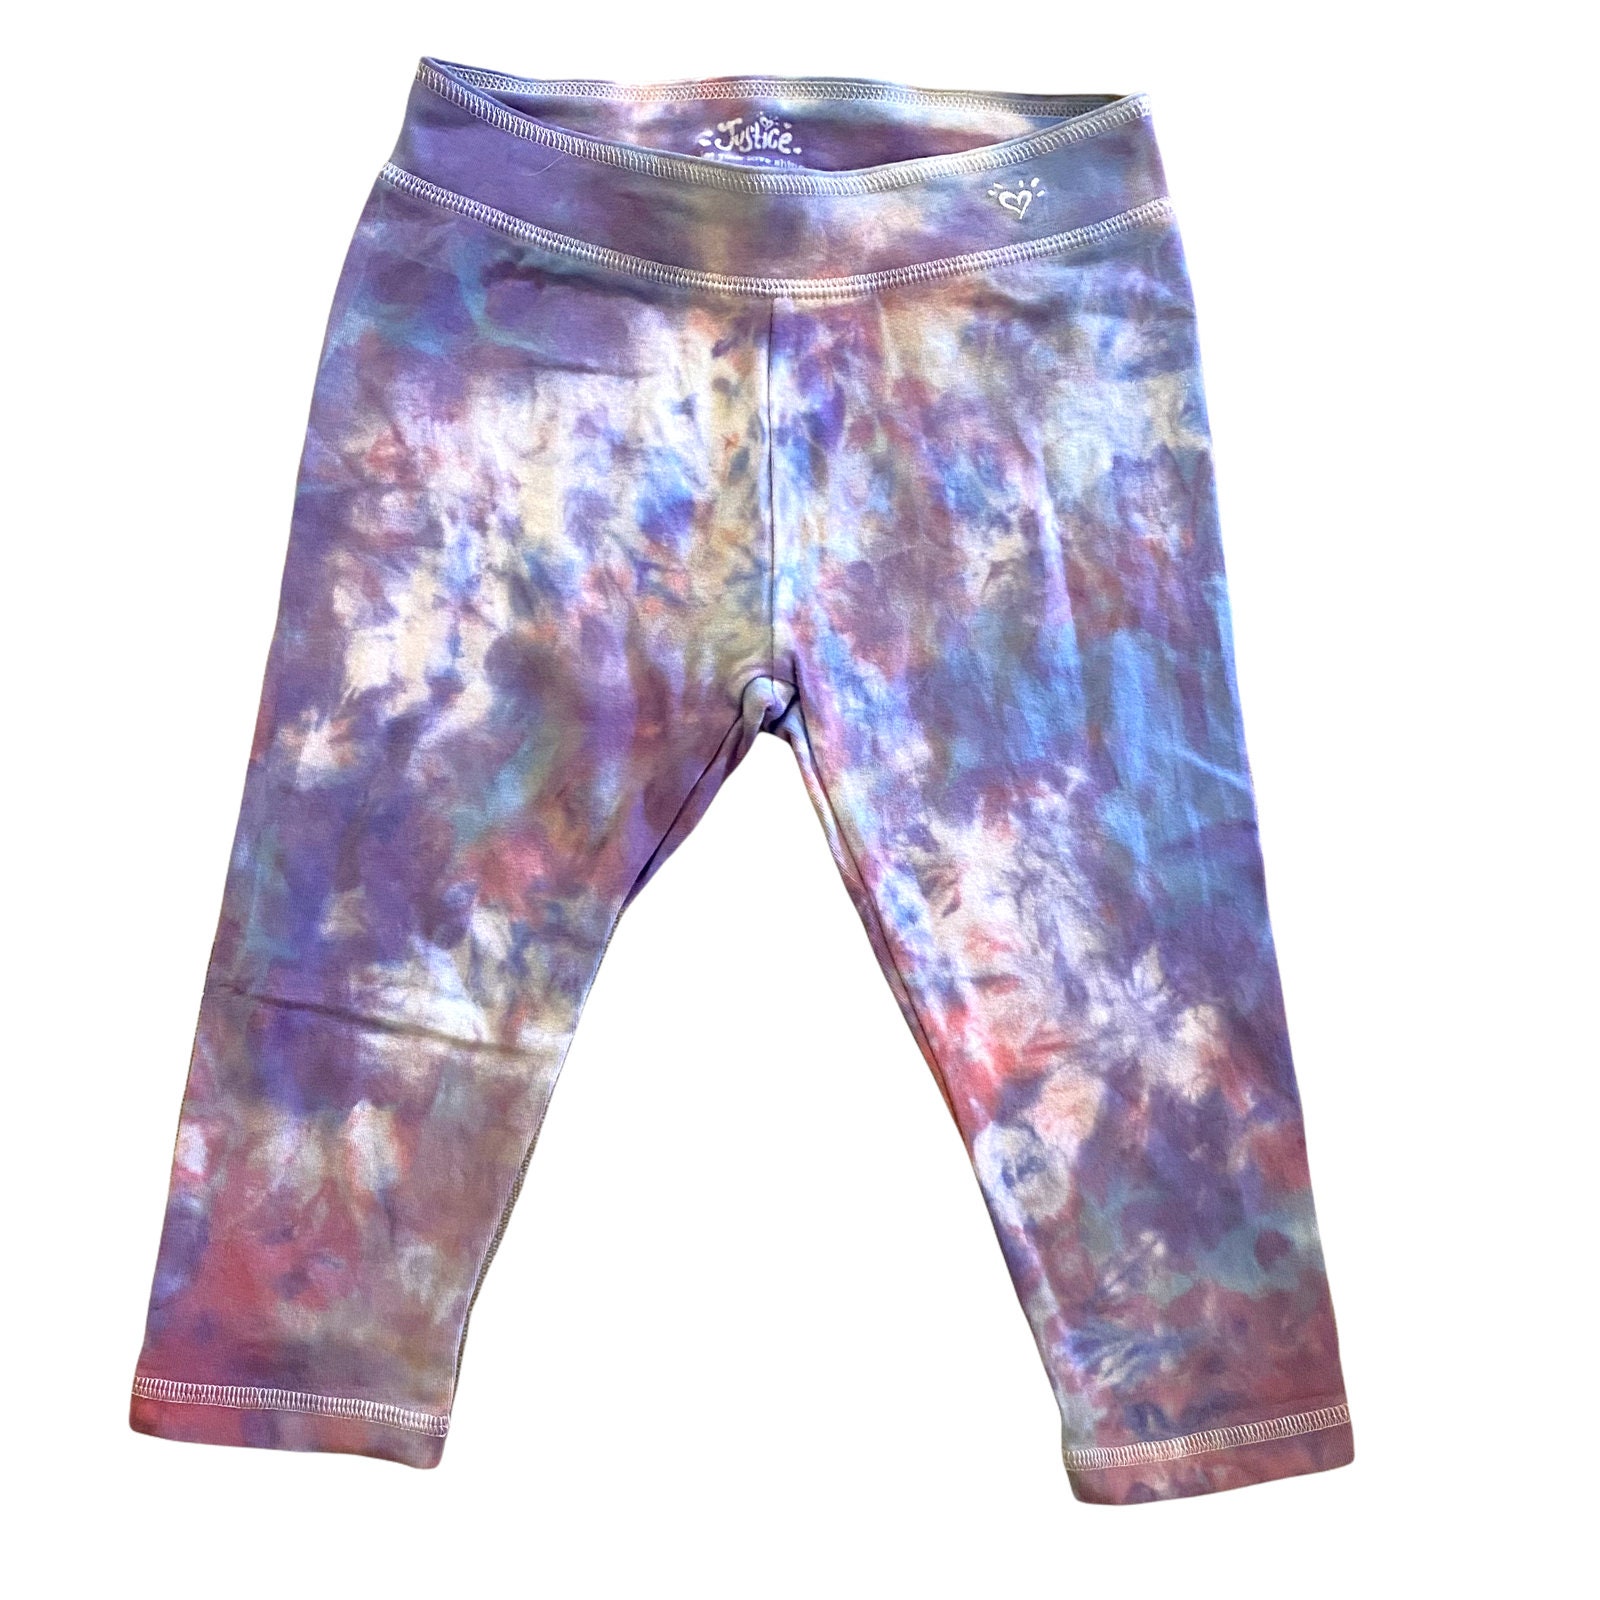 Hand-dyed Pastel Child\'s Size Brand Leggings 6 - Justice Tie-dye Etsy